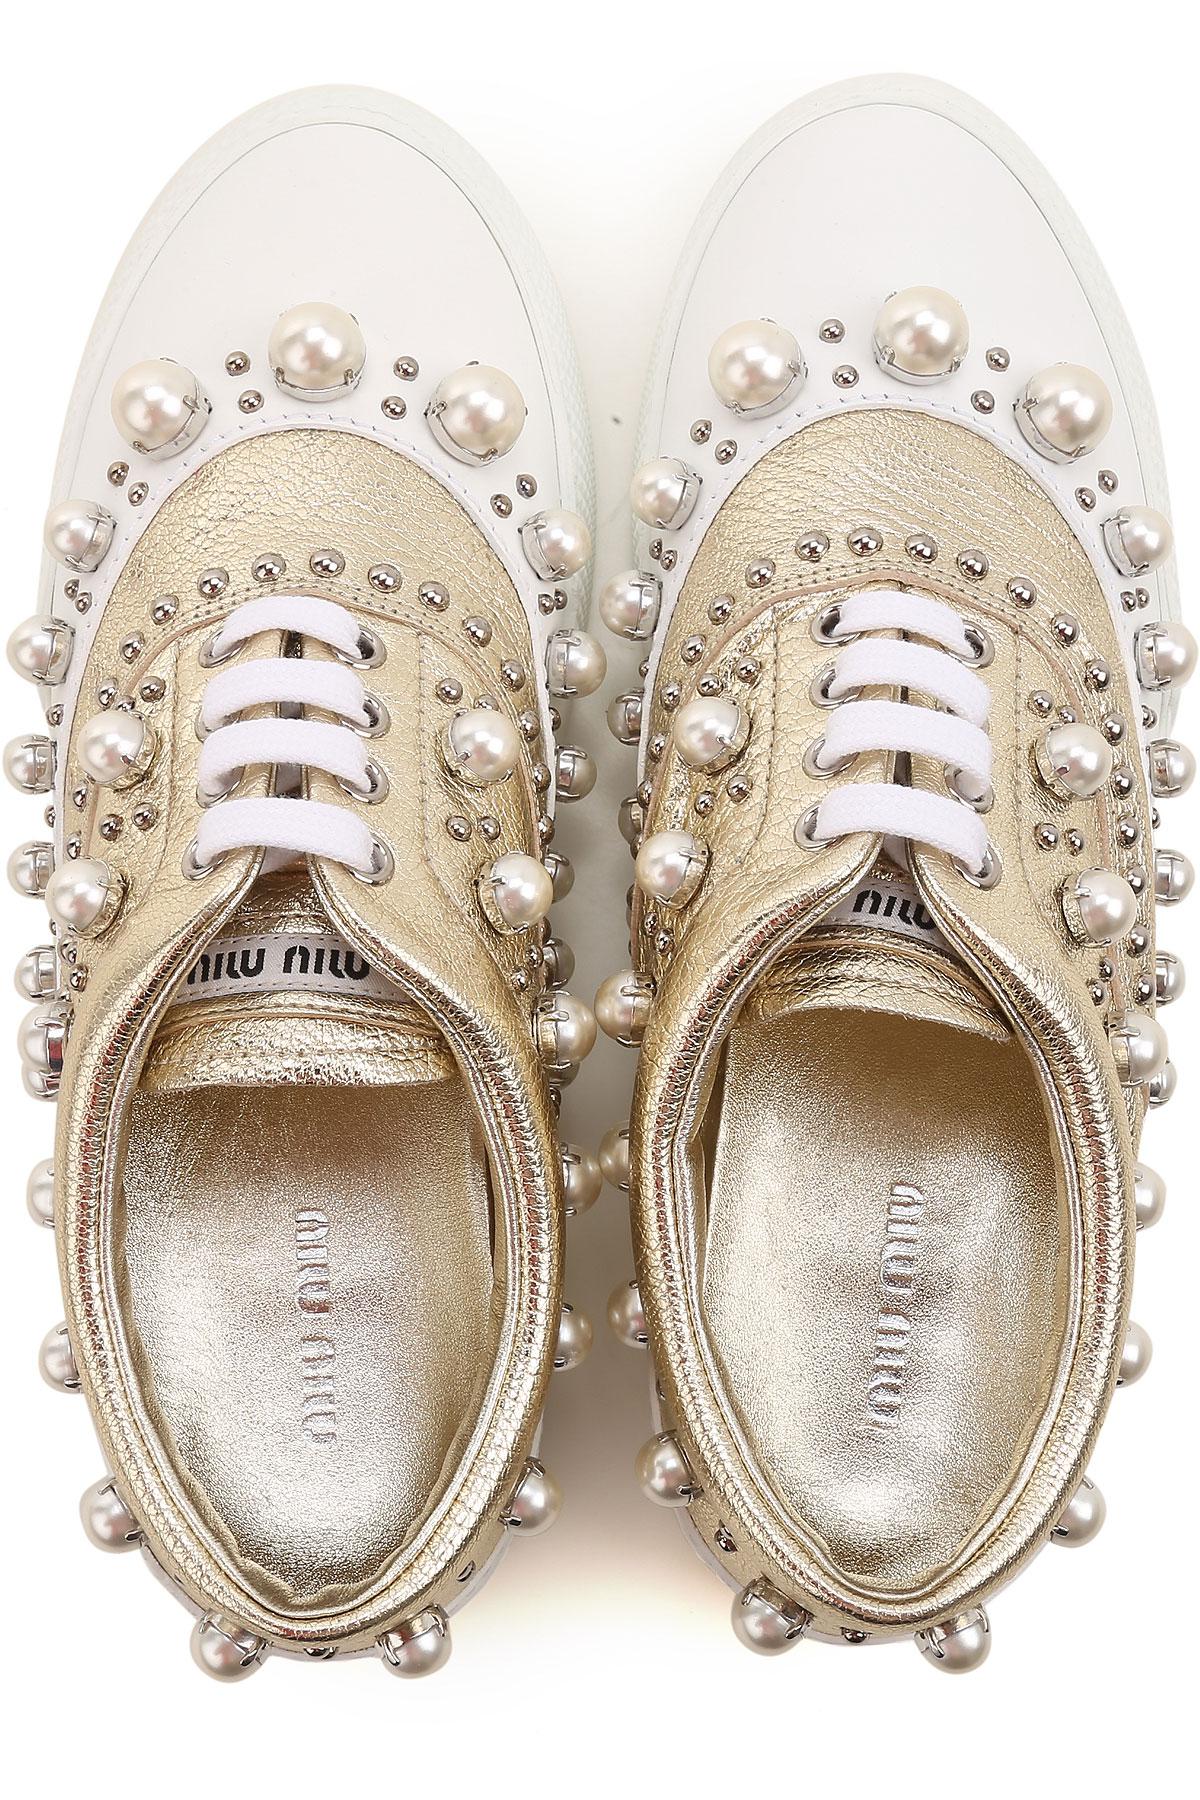 Miu Miu Sneakers For Women On Sale In Outlet in White - Lyst